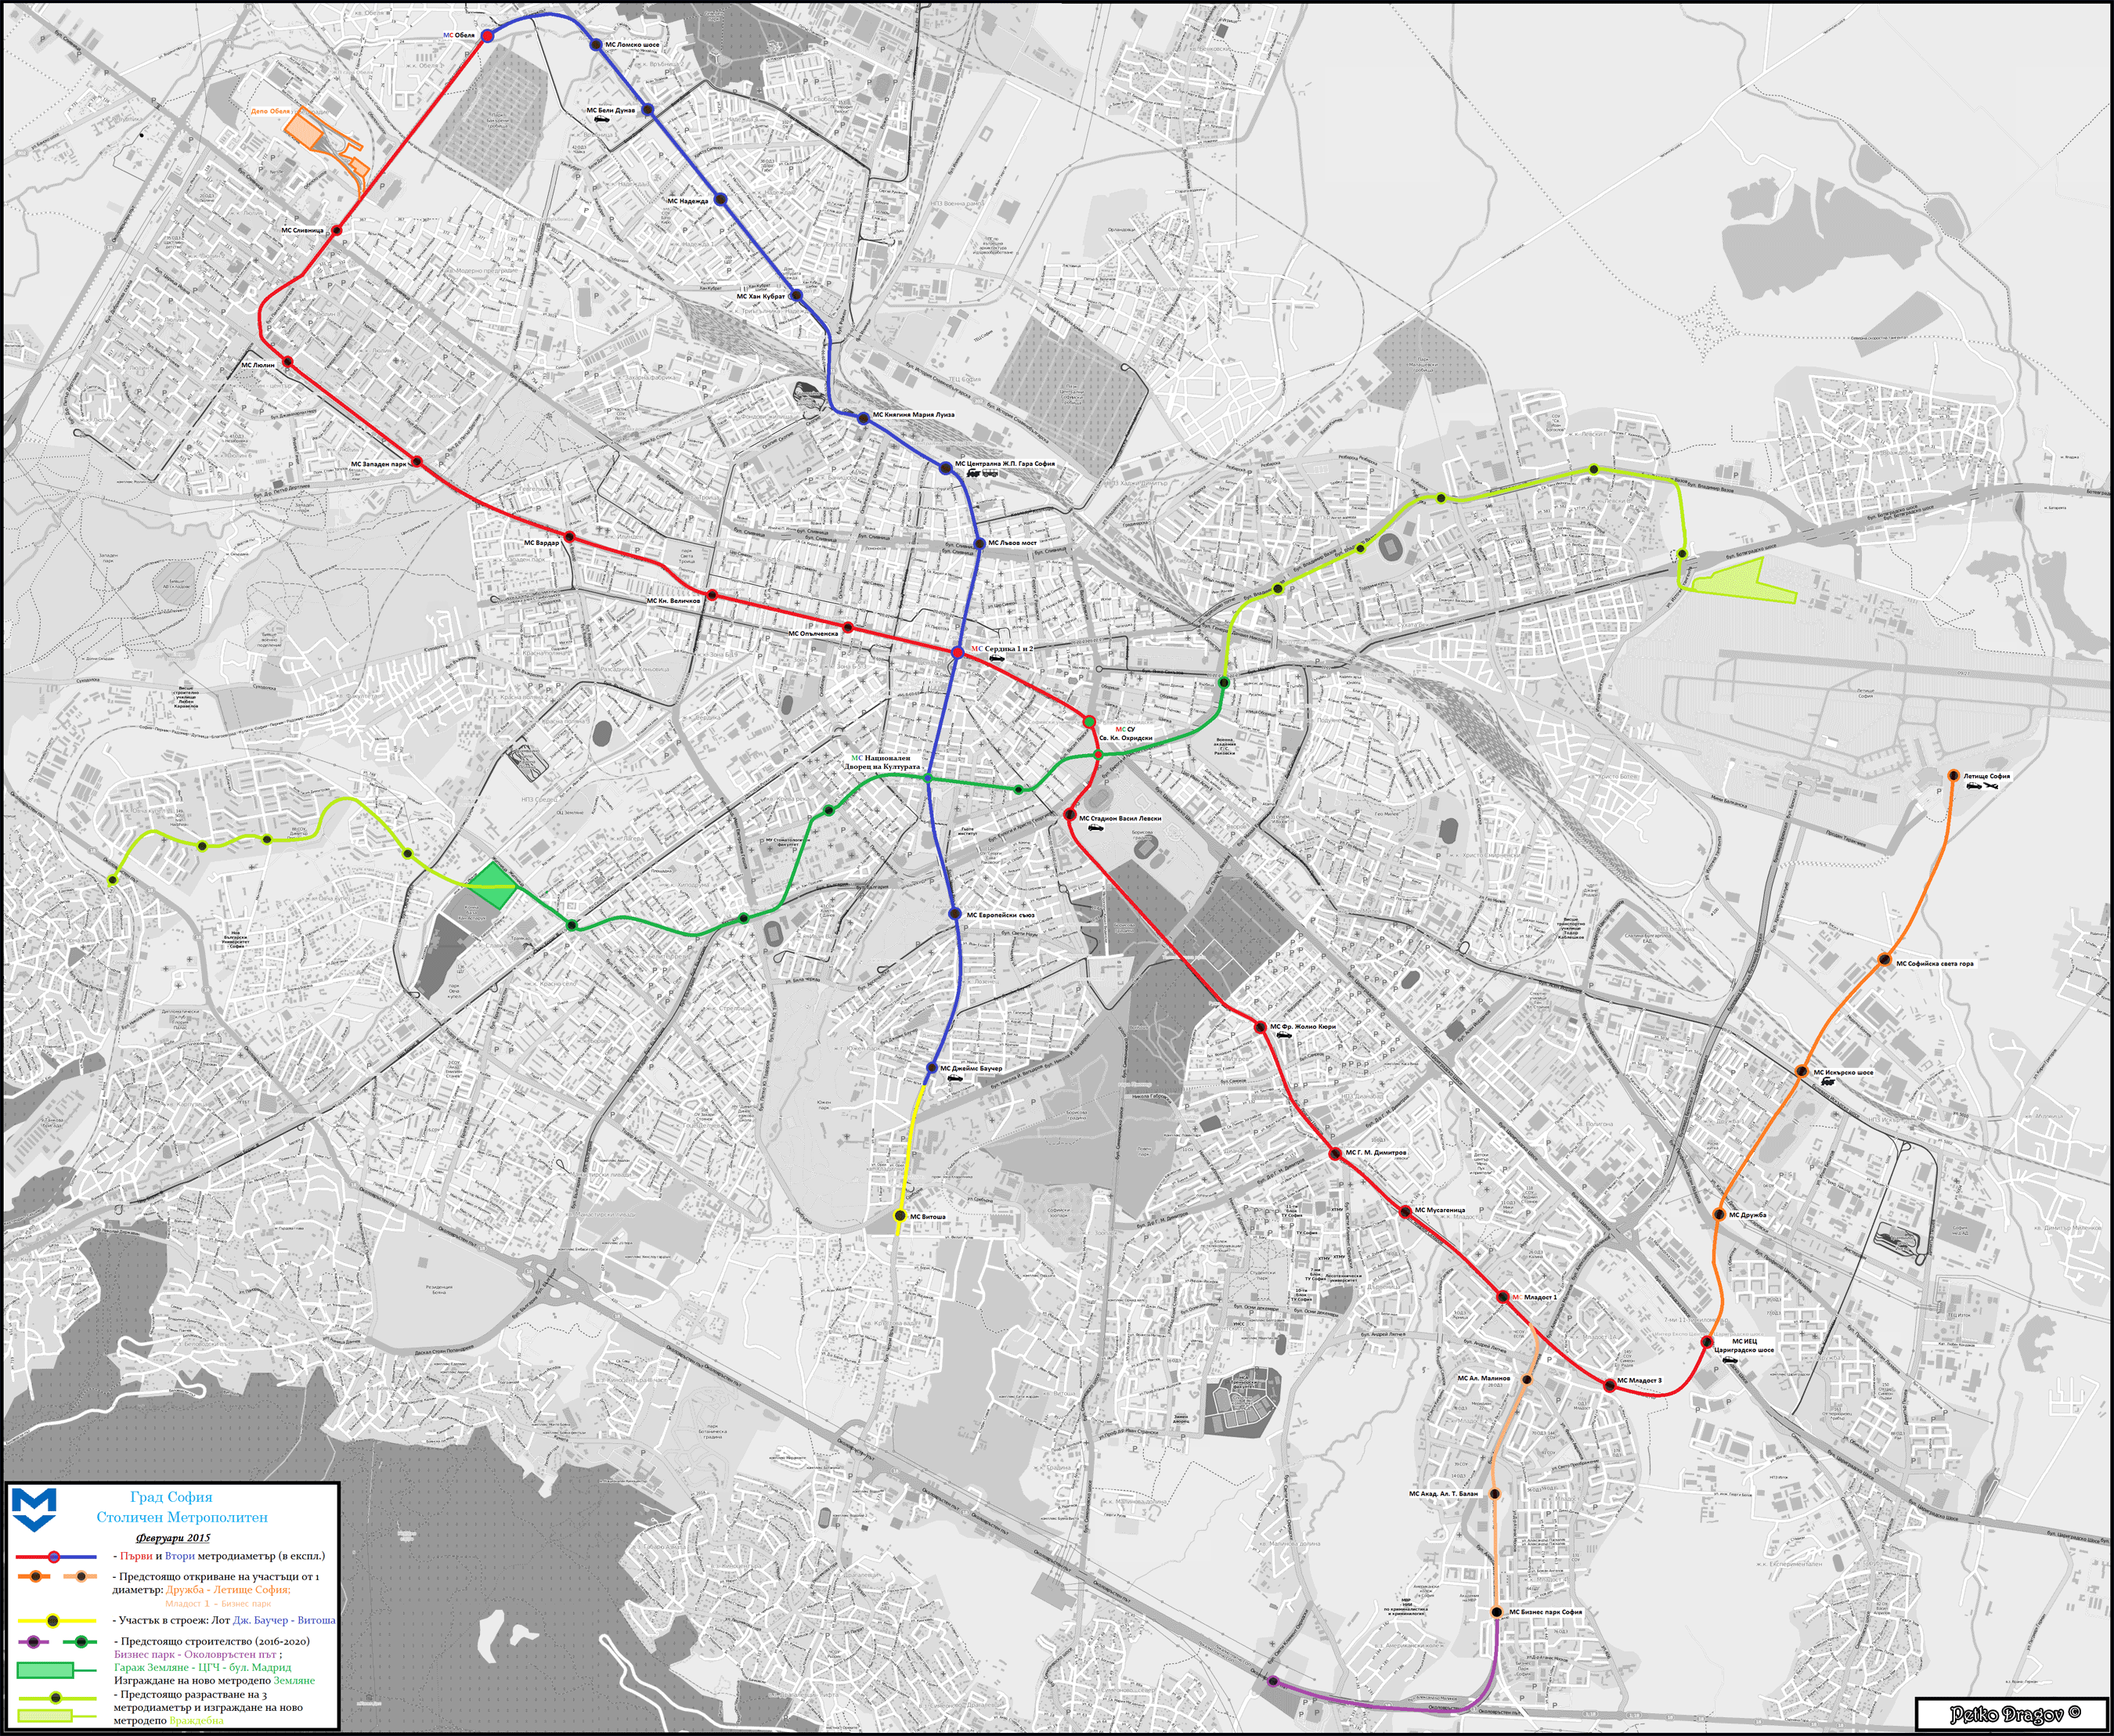 Sofia — General schemes — Metropolitan; Maps made with OpenStreetMap